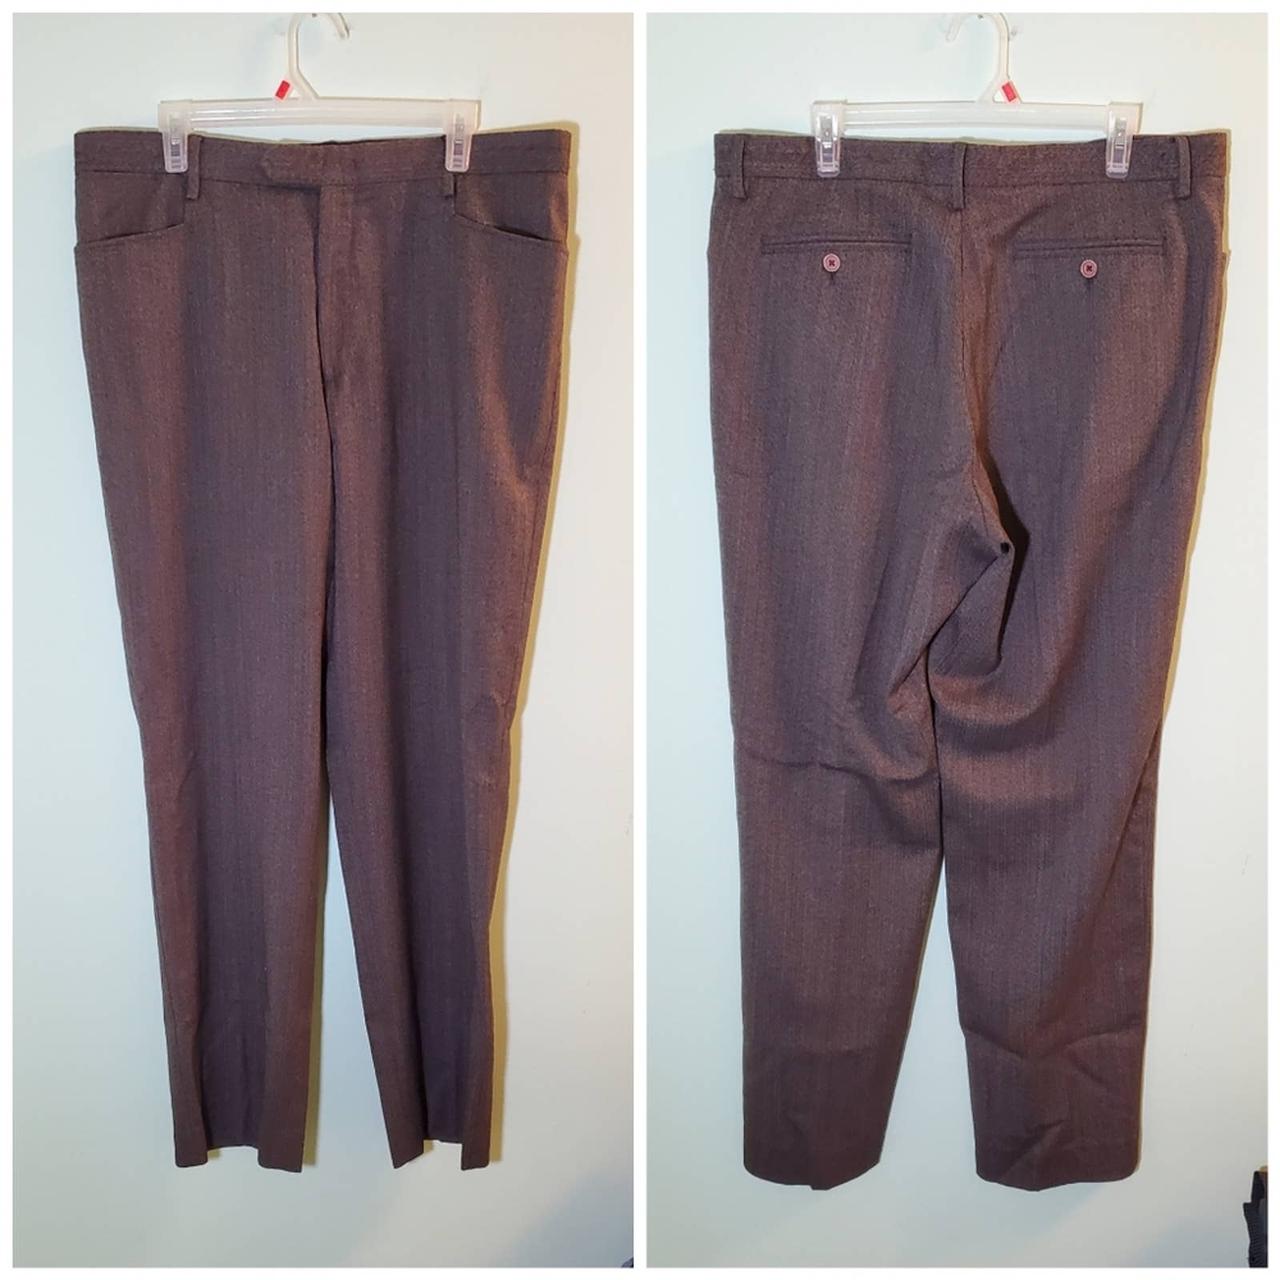 Product Image 2 - Reiss Brown High Rise Pants.
Size